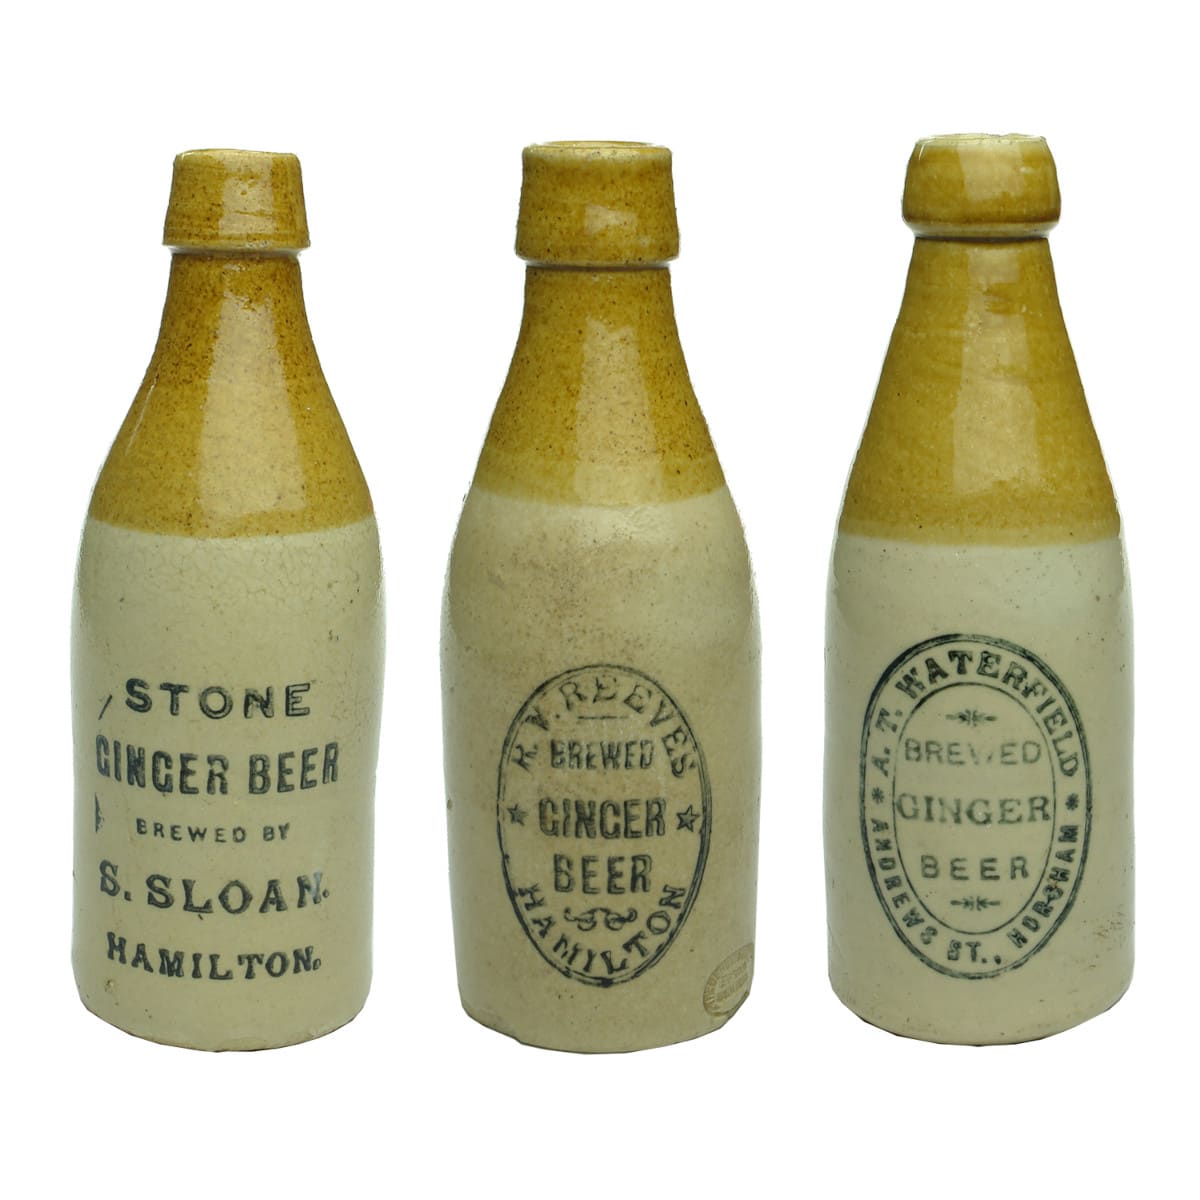 Three Ginger Beers: S. Sloan, Hamilton; R. V. Reeves, Hamilton and Waterfield, Horsham. (Victoria)